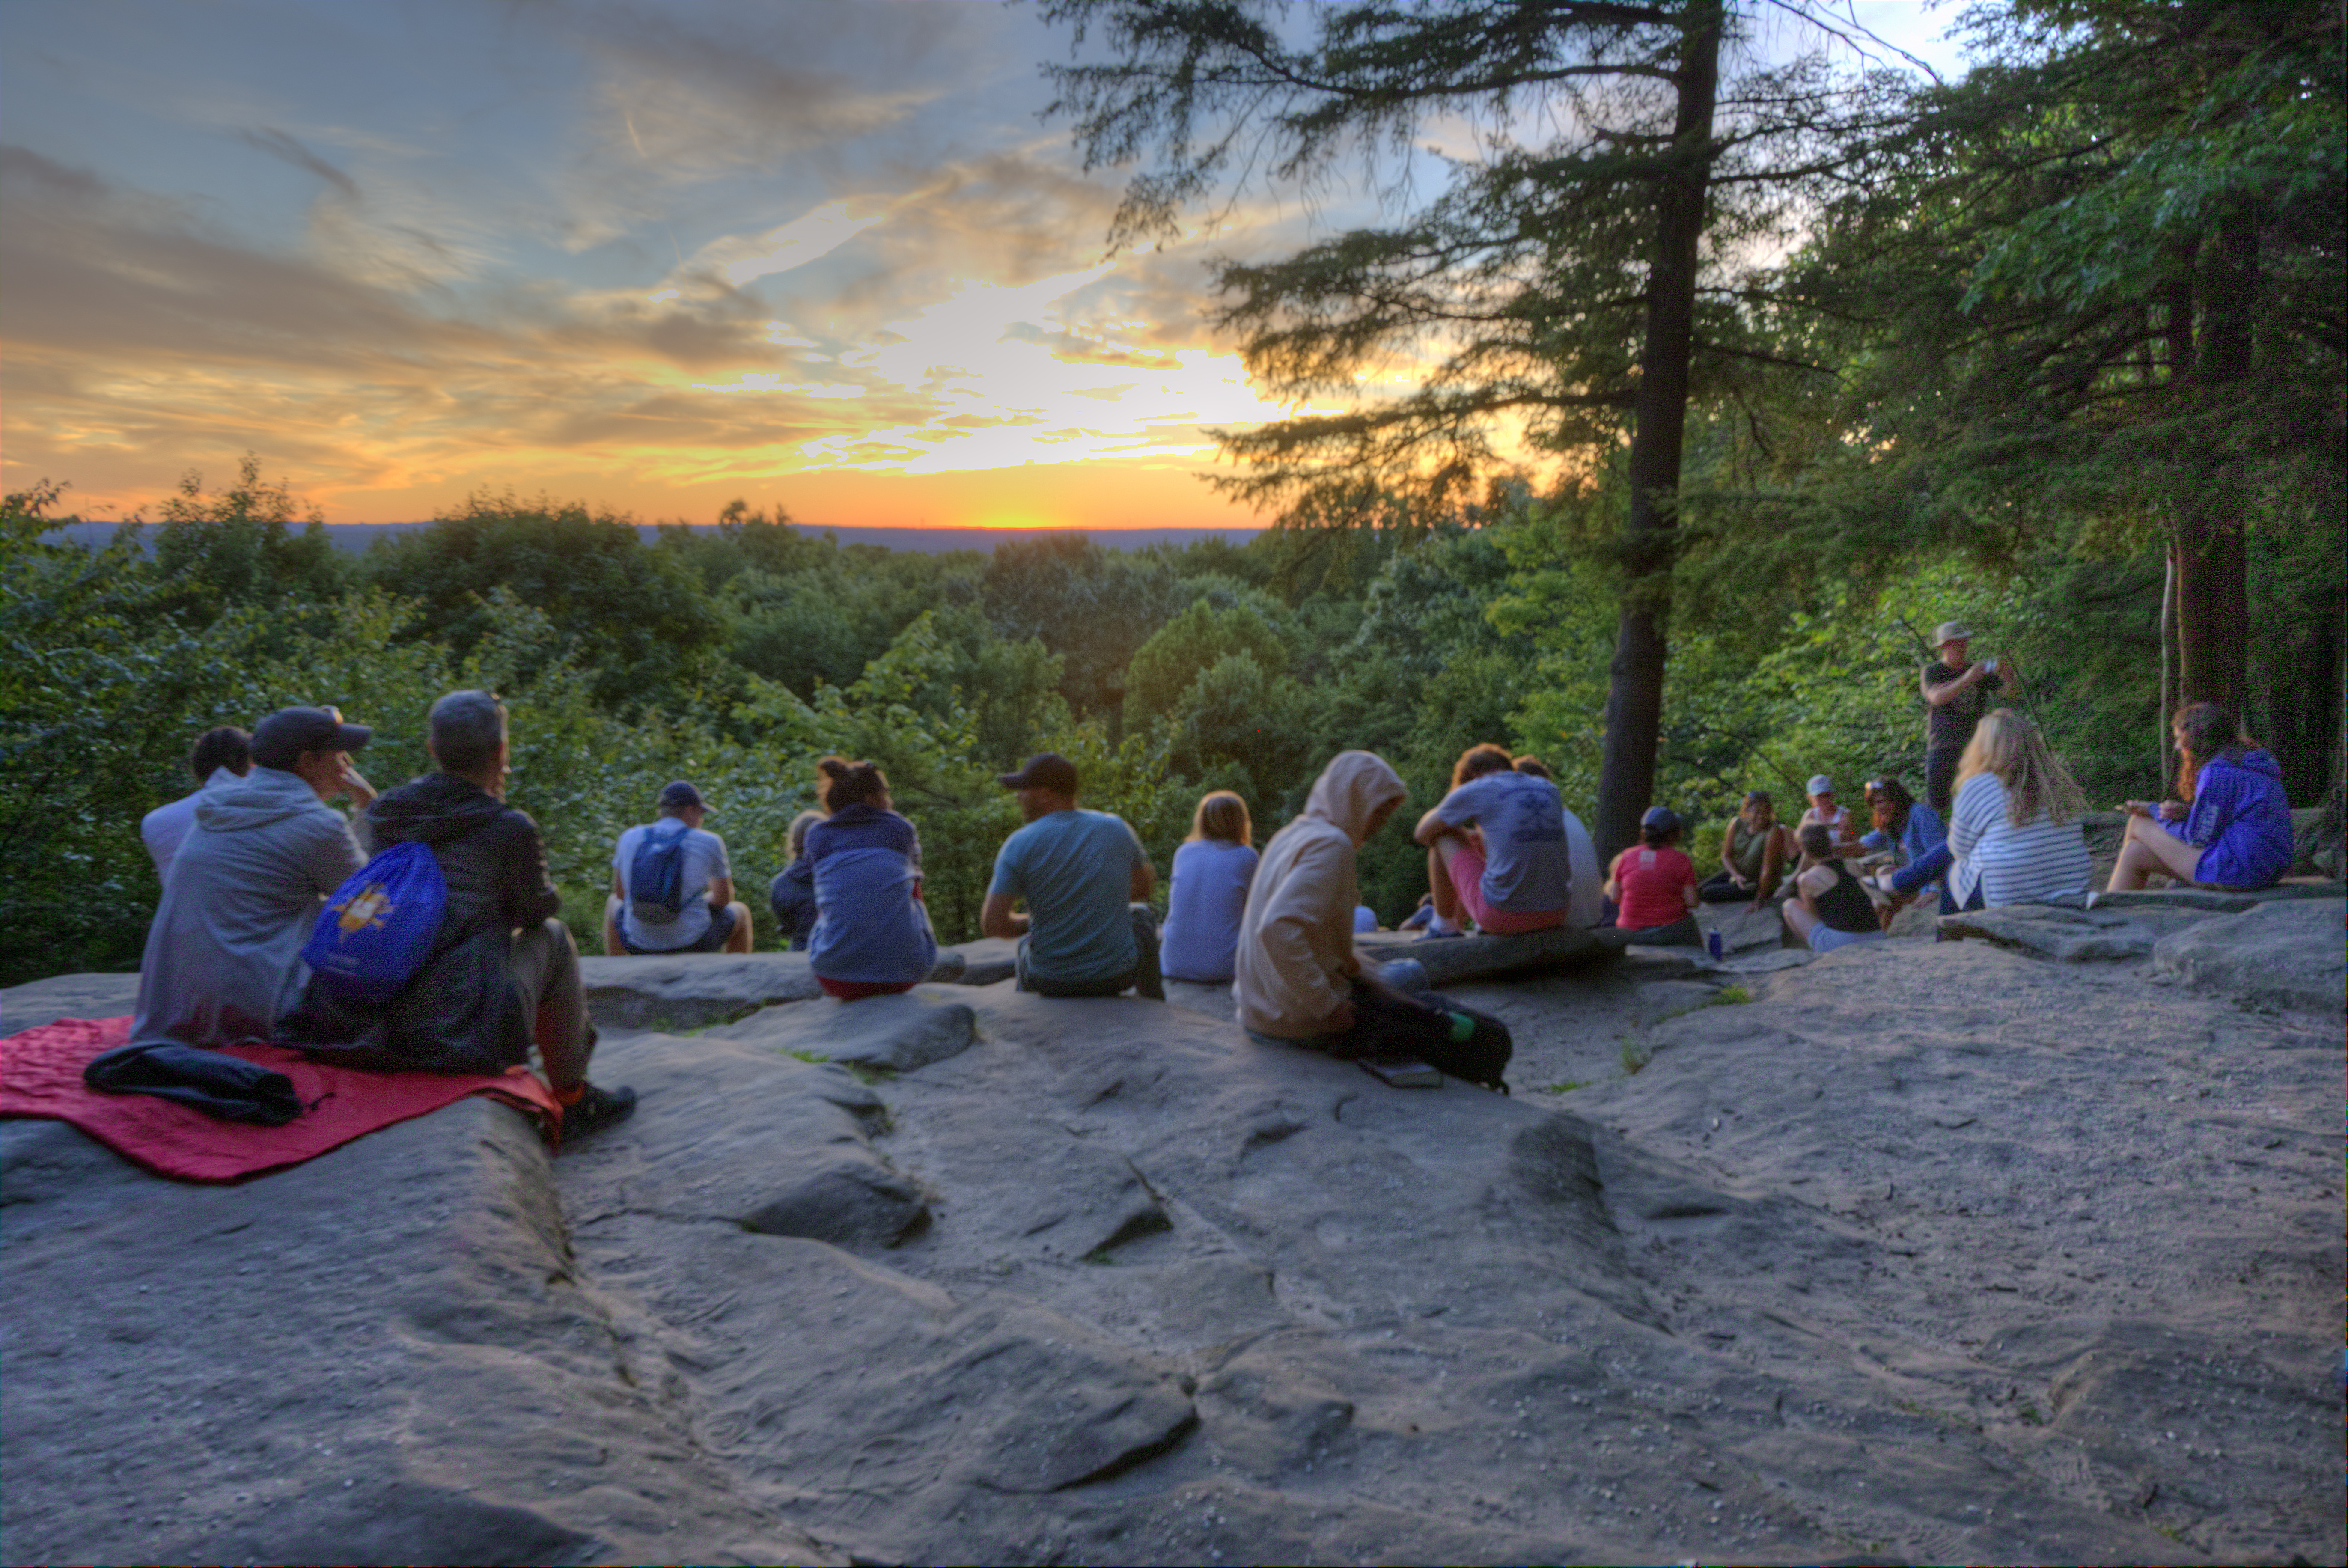 People sitting on a rock ledge at sunset overlooking a green forest